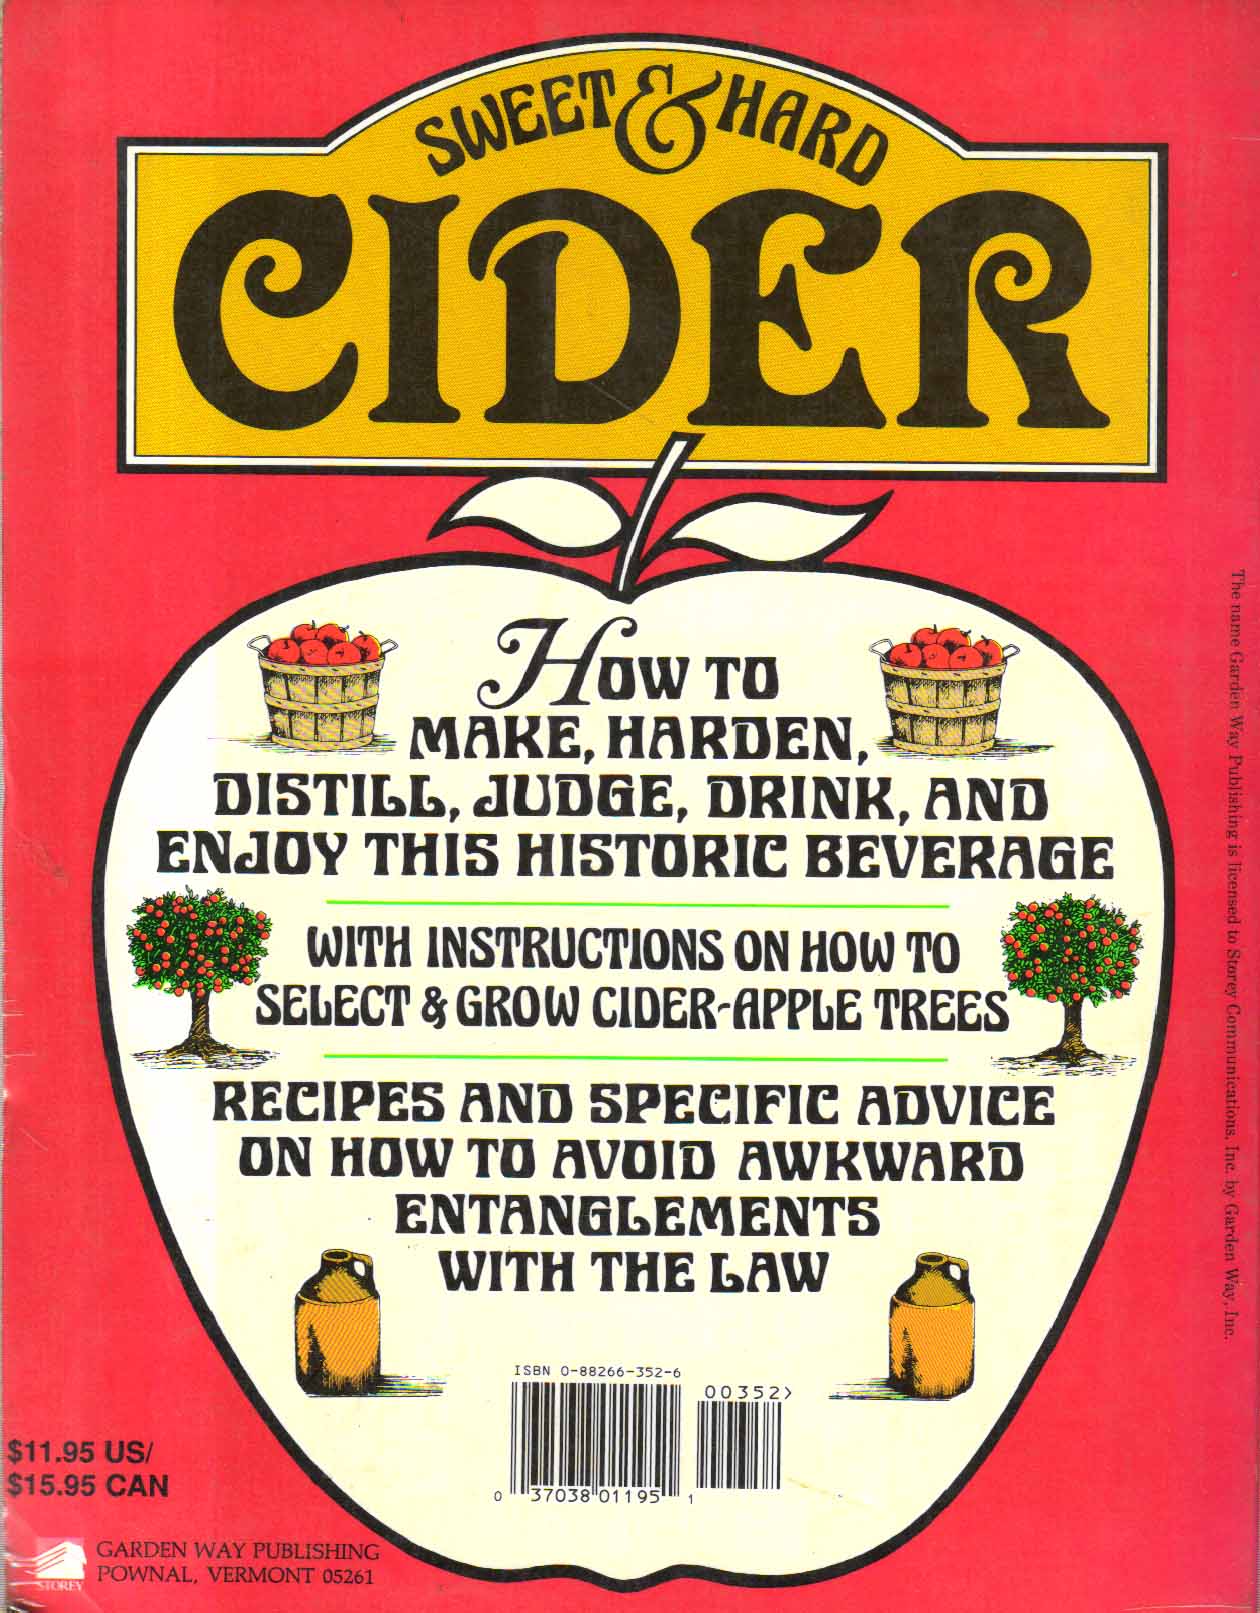 Sweet and Hard Cider